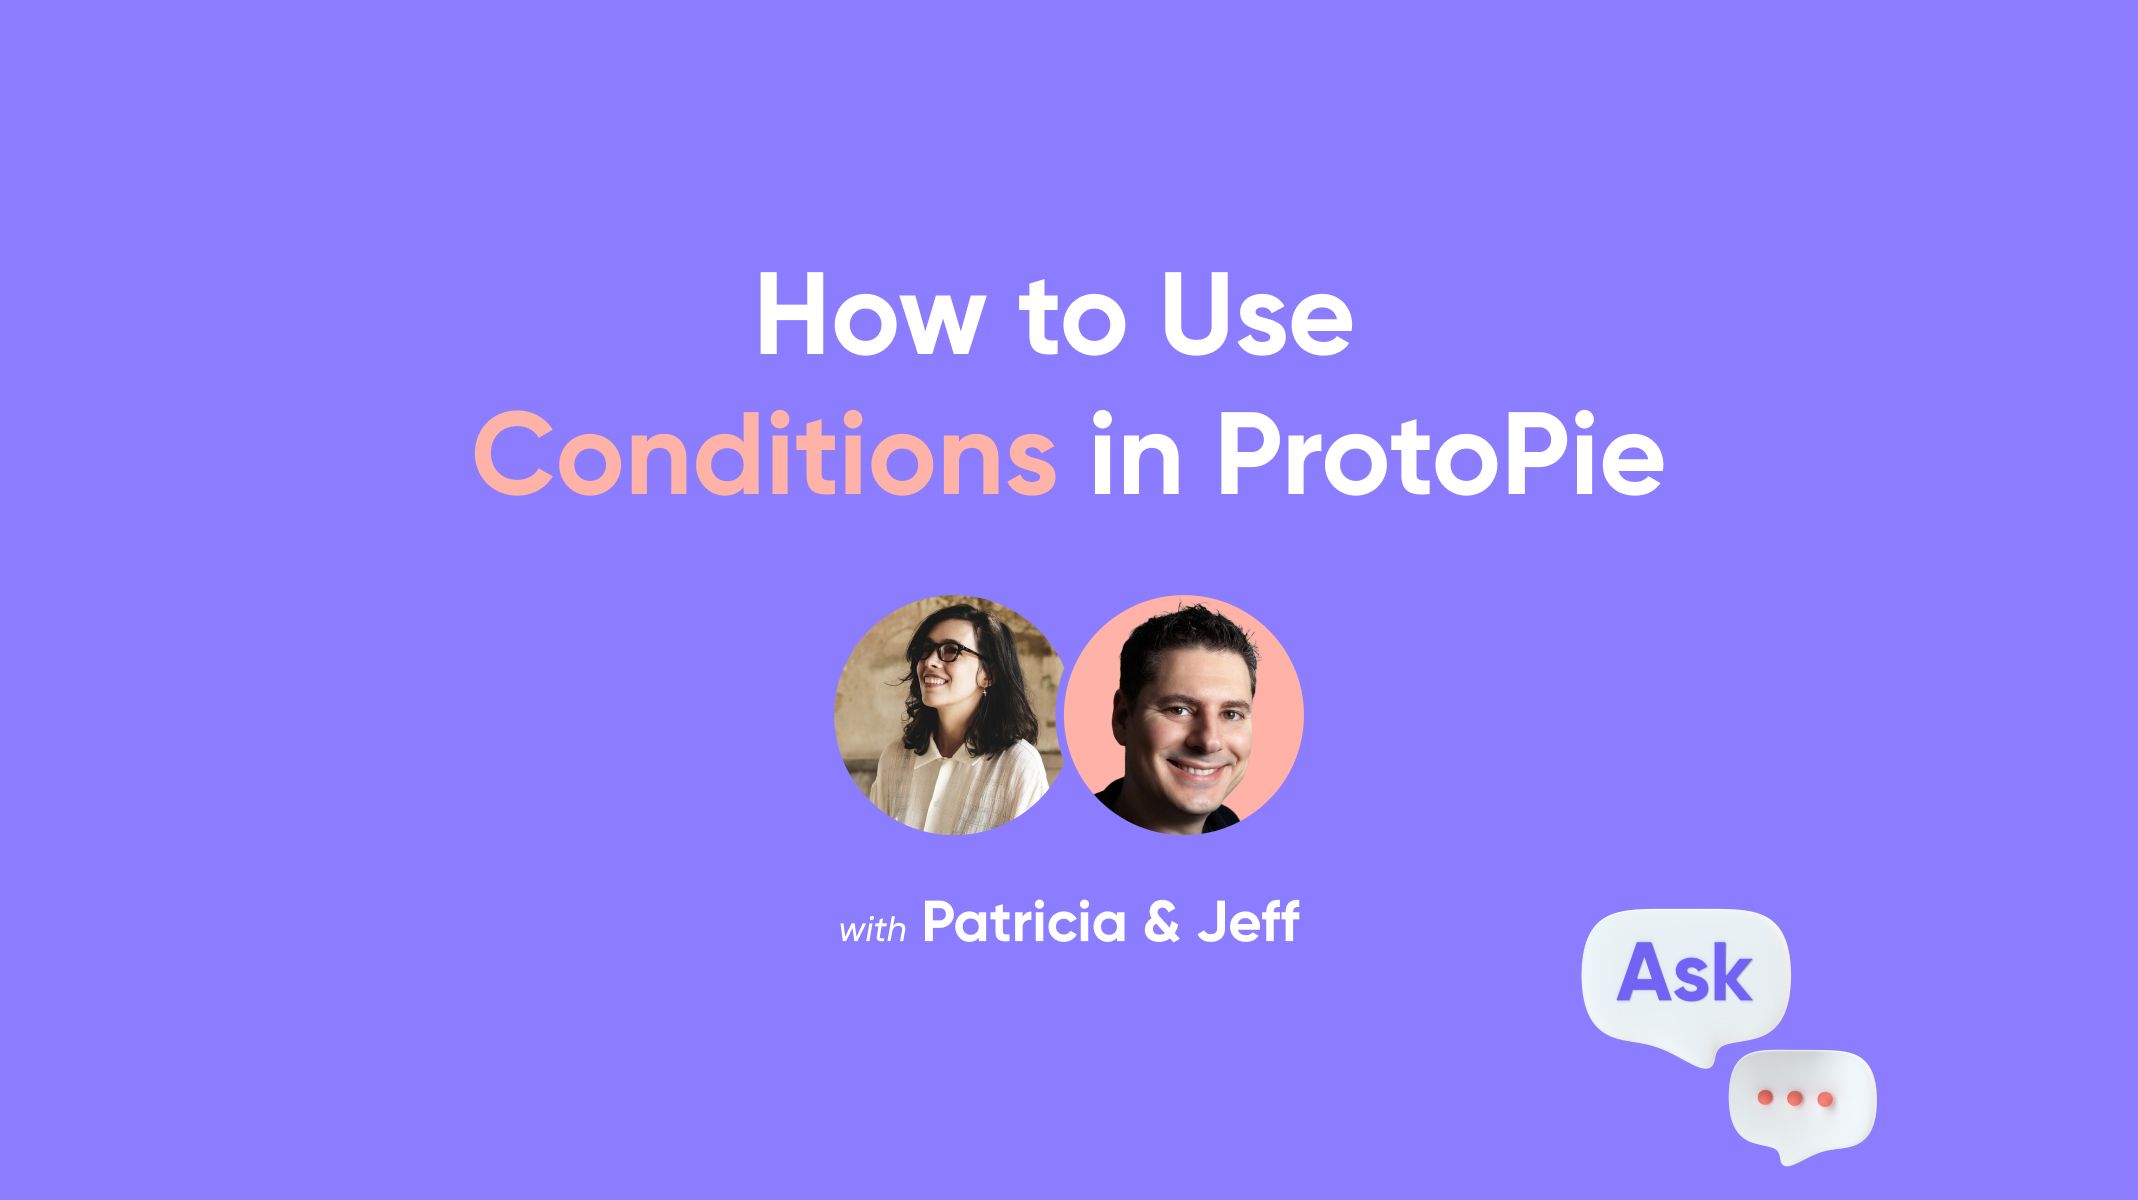 ask protopie session about using conditions in protopie